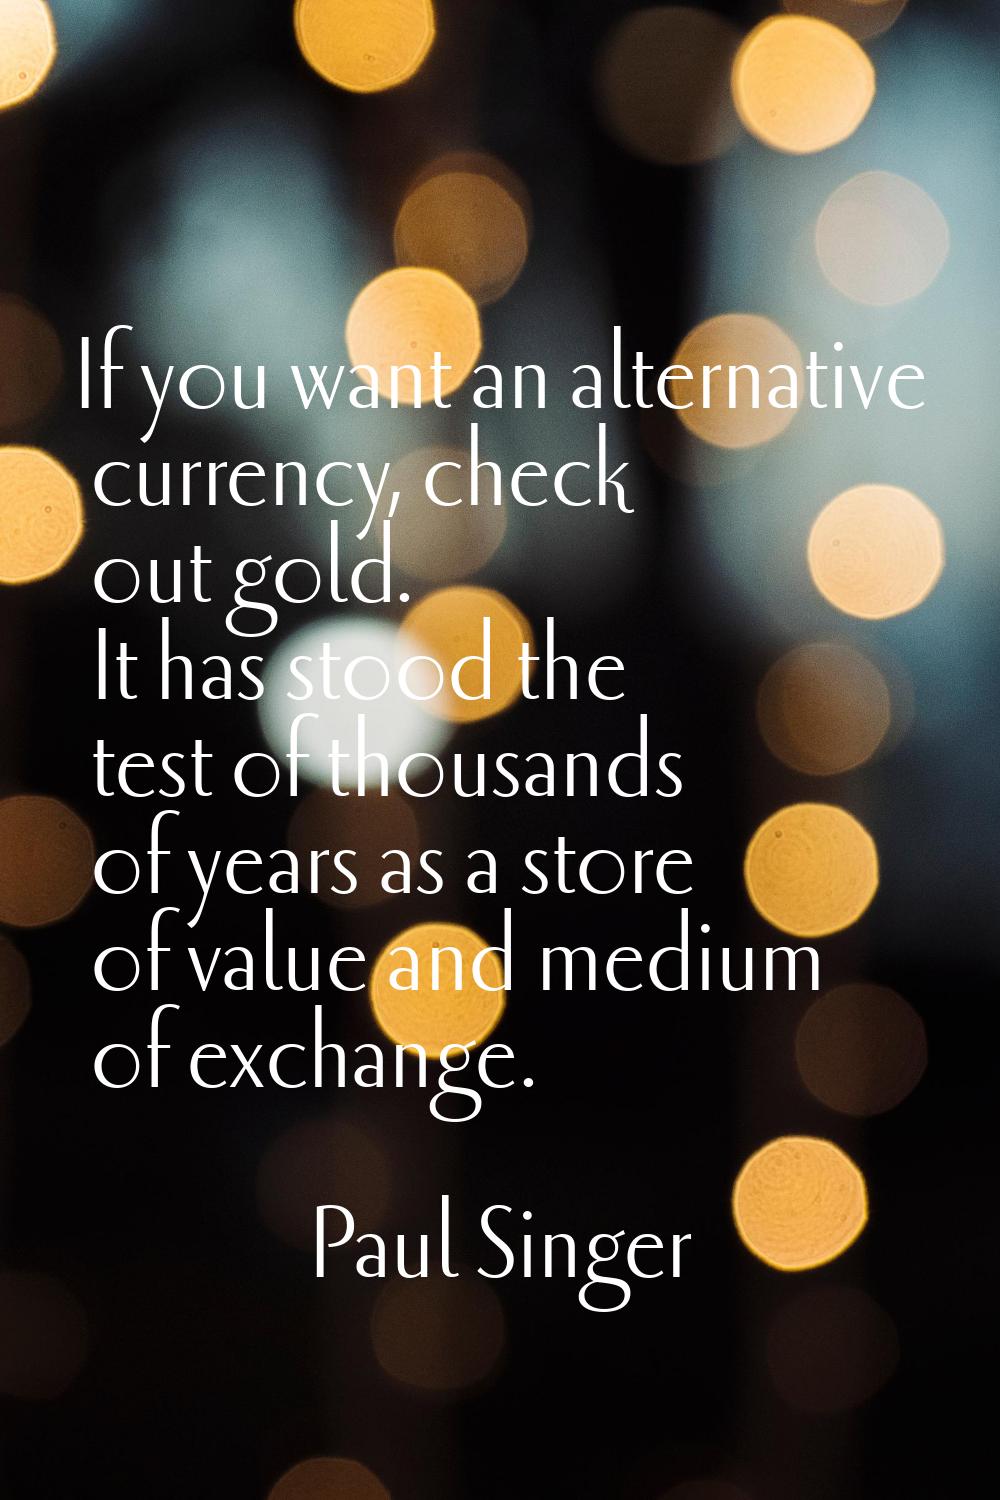 If you want an alternative currency, check out gold. It has stood the test of thousands of years as